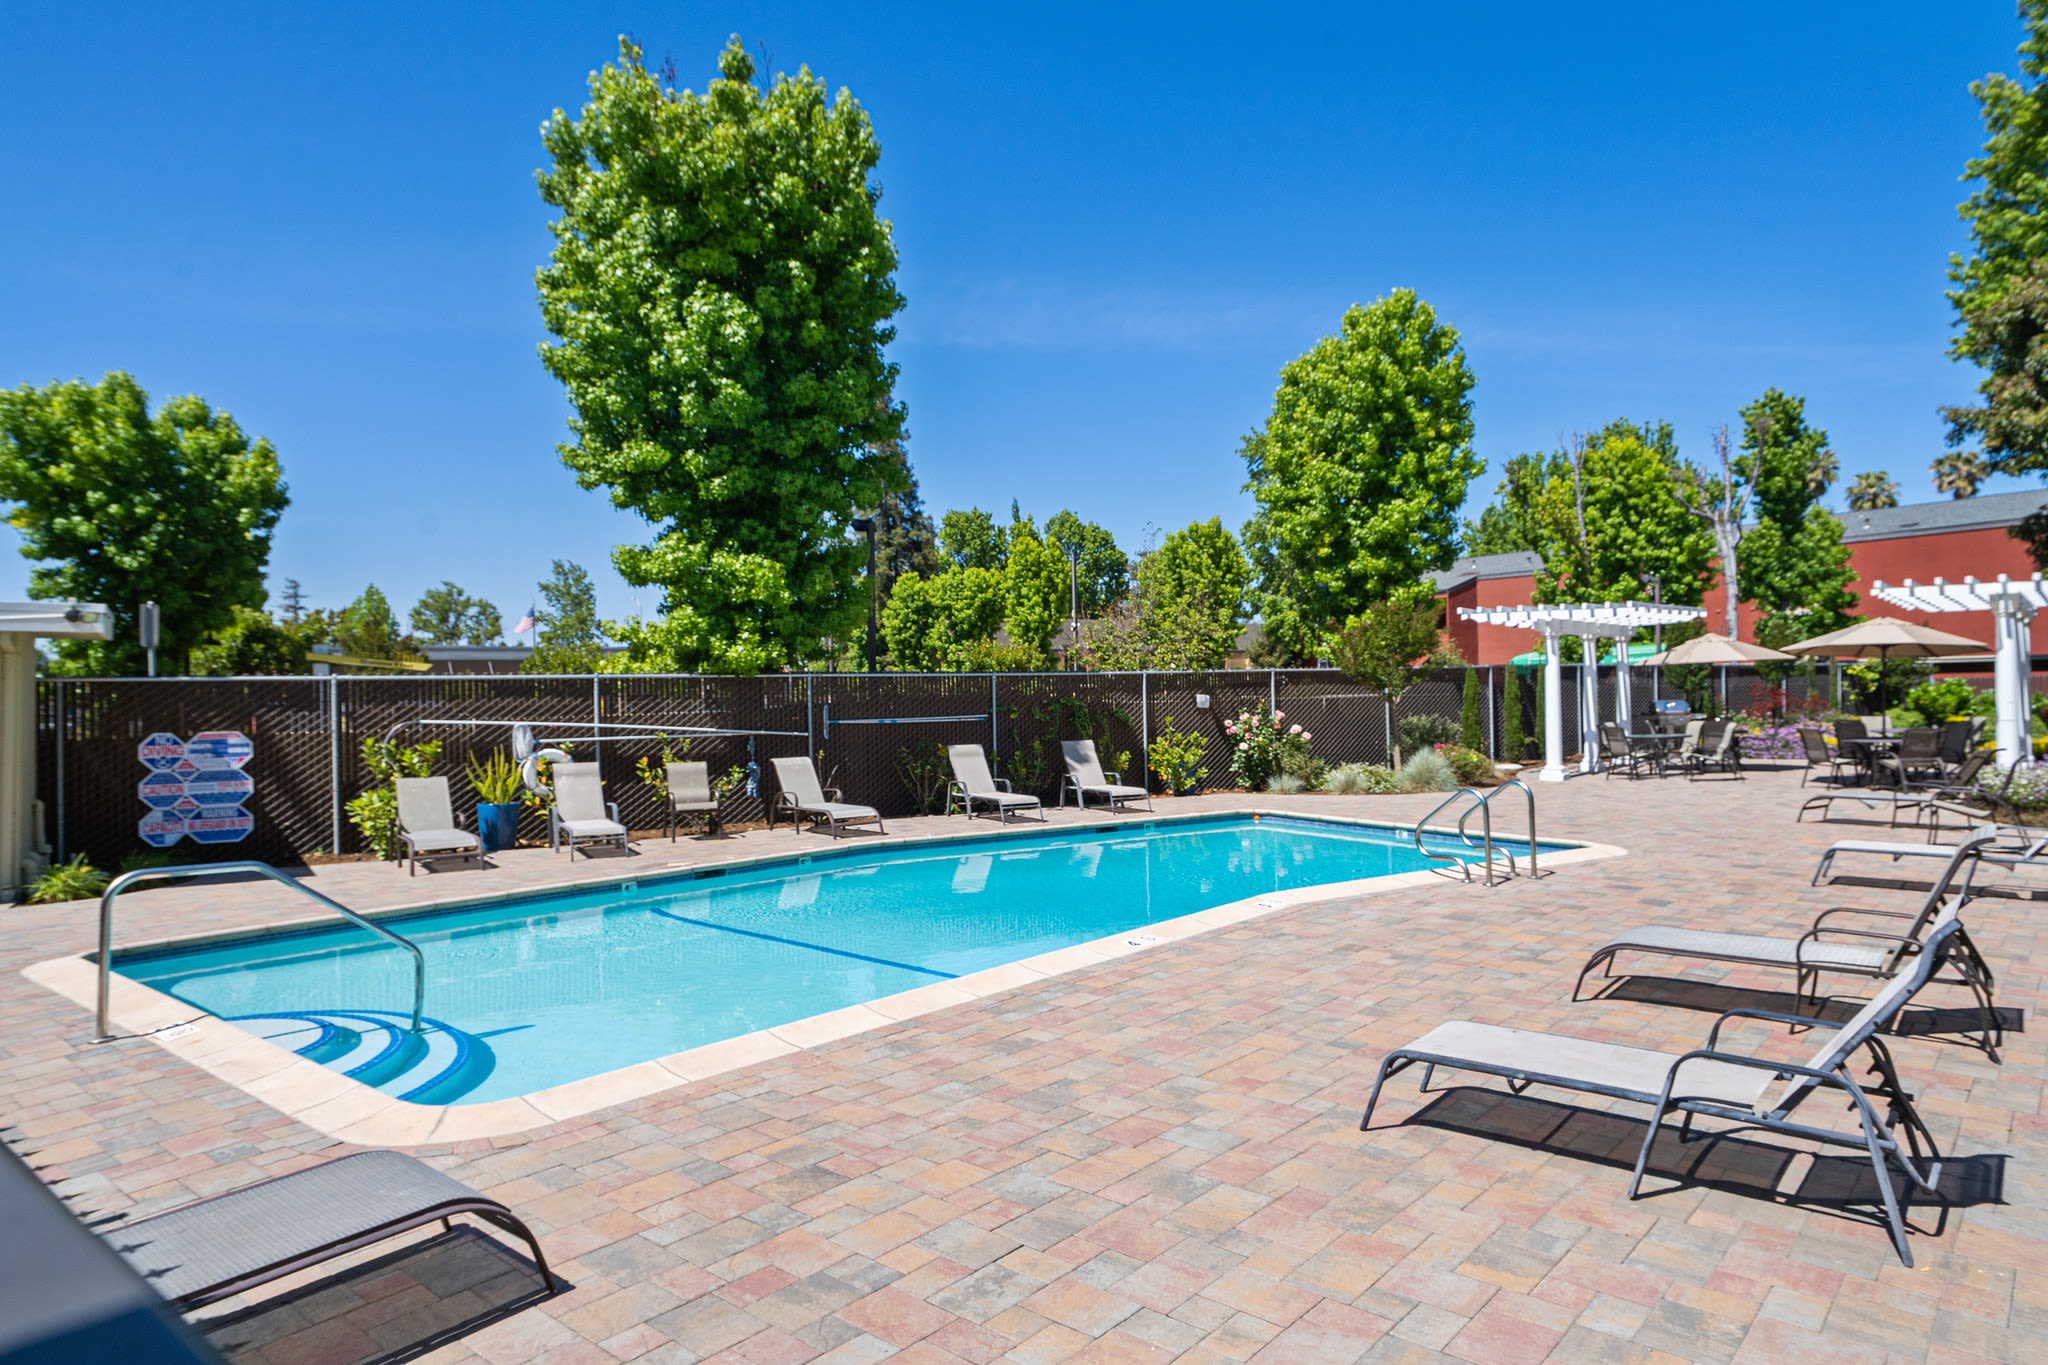 Sparking pool for relaxation at Coronado Apartments in Fremont, California